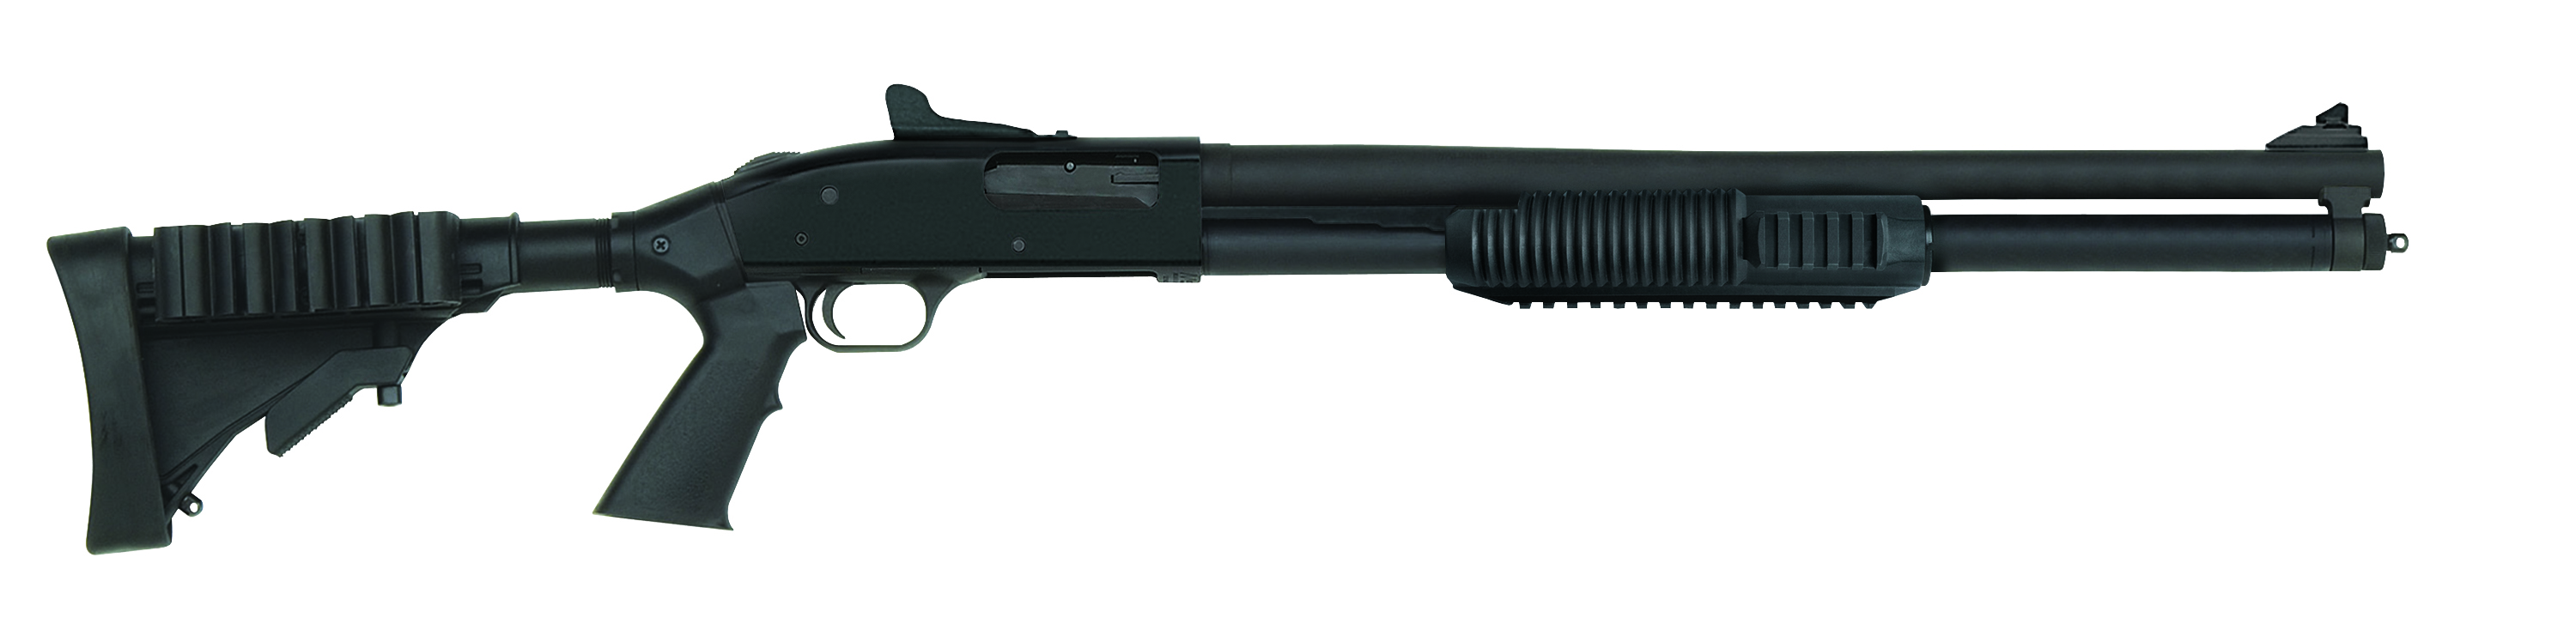 Mossberg 500 Shotgun Pics, Weapons Collection